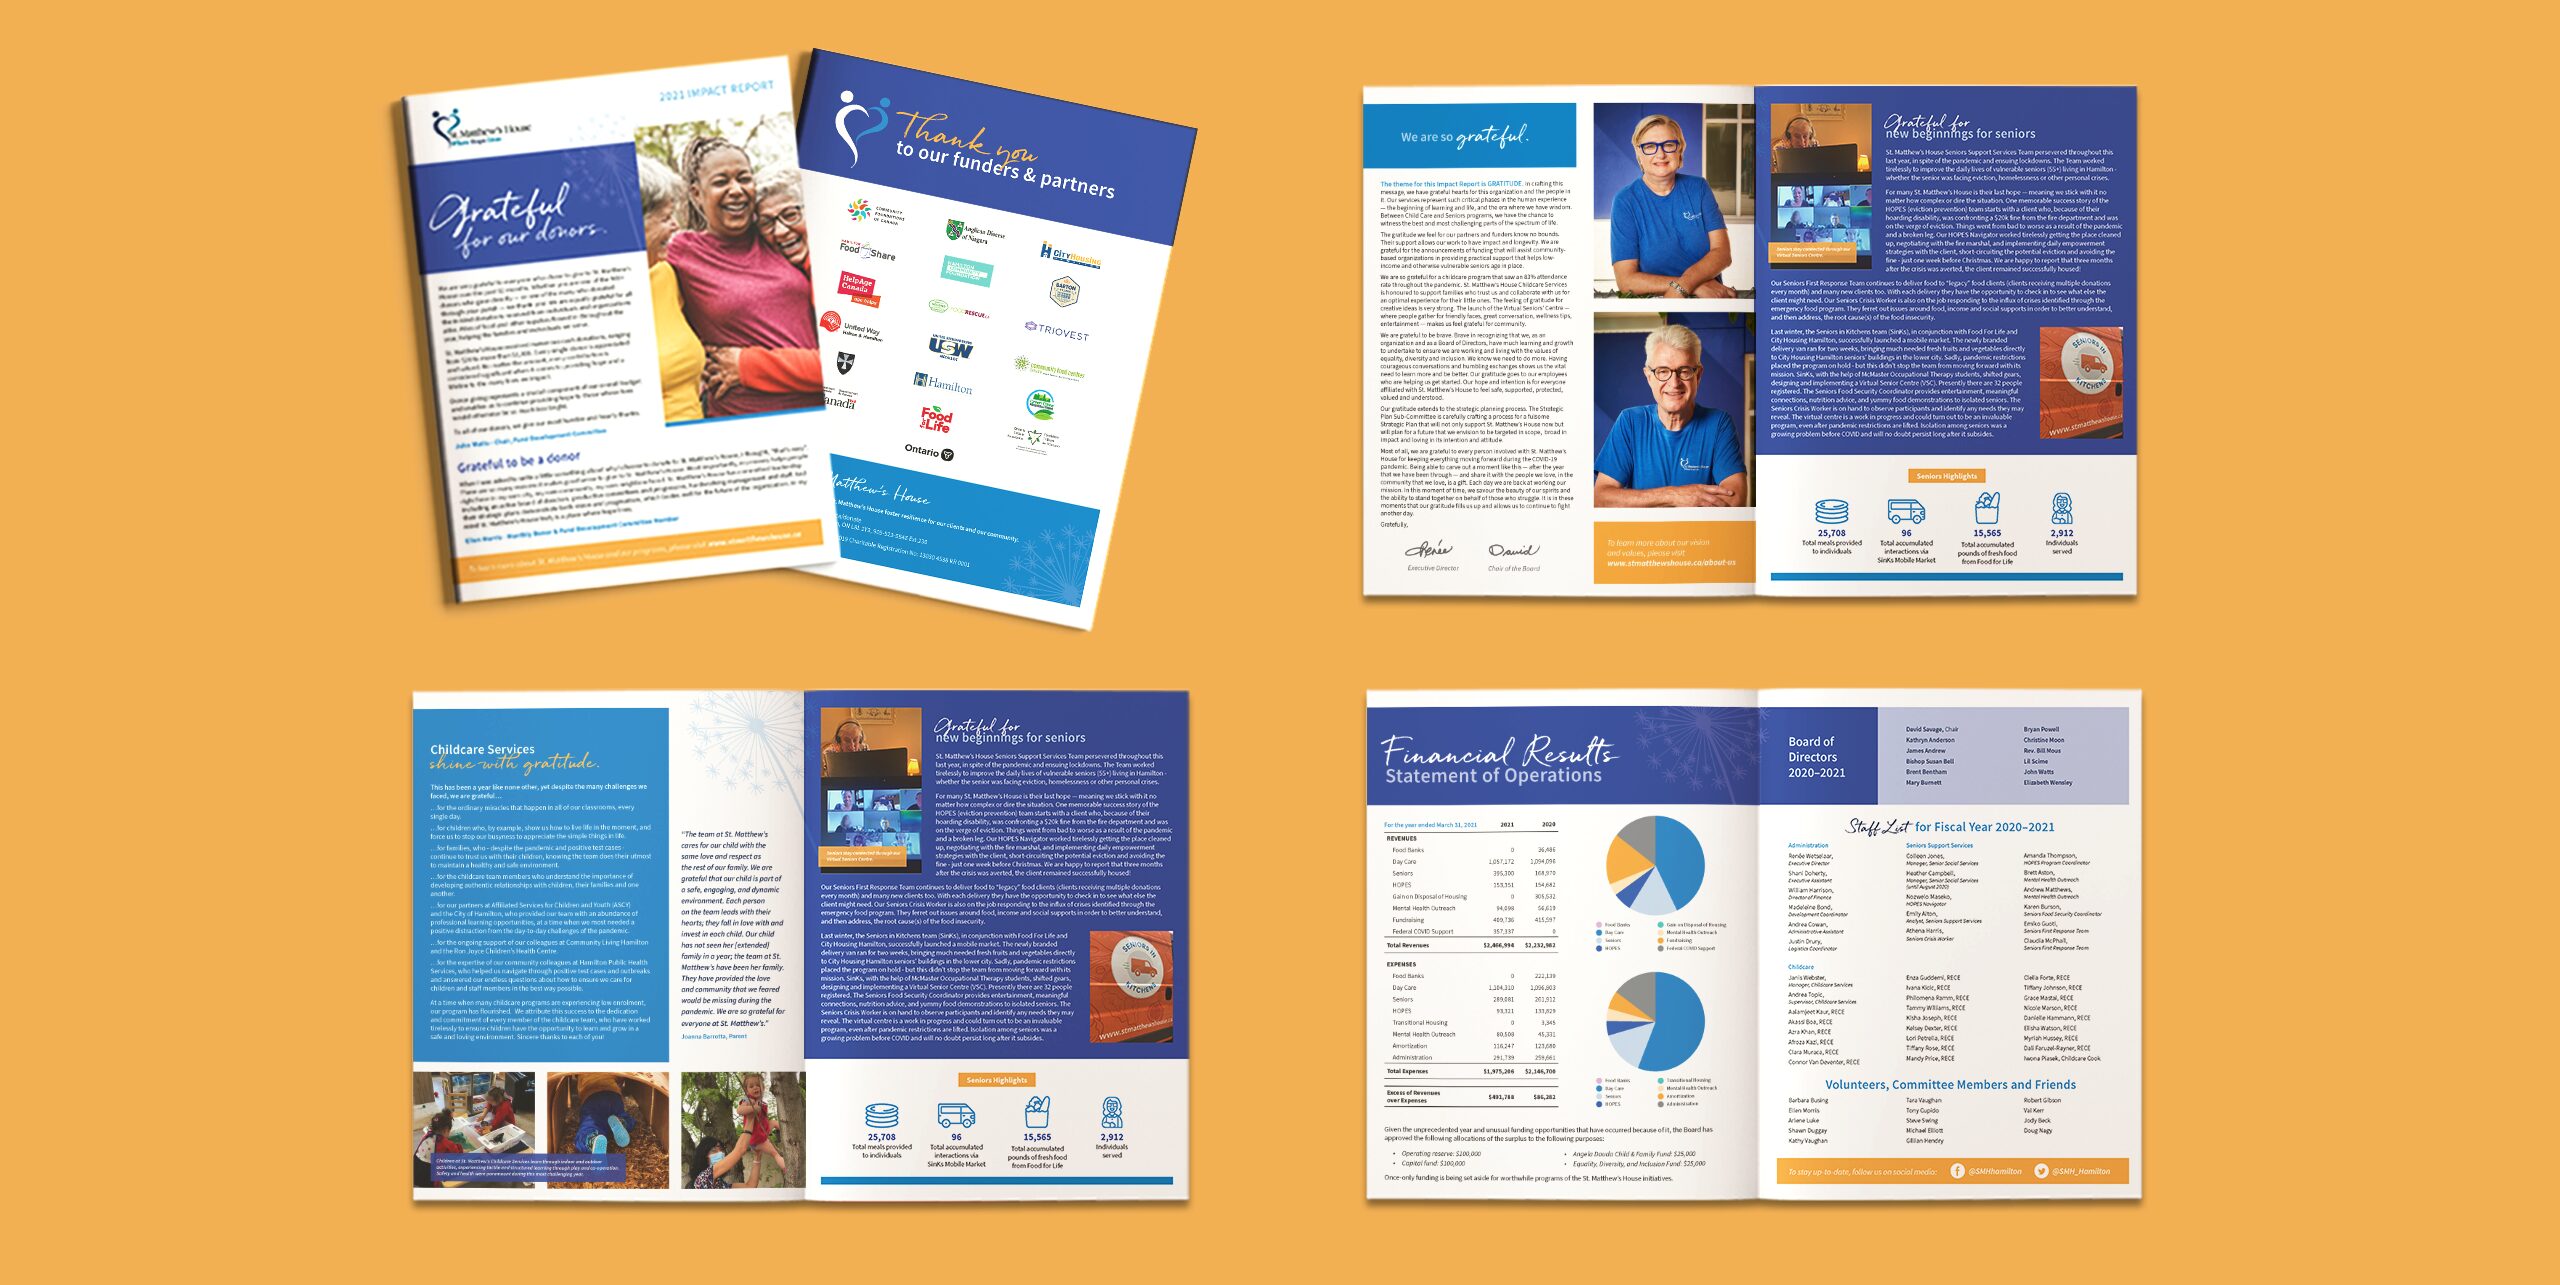 An open booklet for St. Matthew's House featuring sponsor logos, and text expressing gratitude for their donars. The booklet is laying face up on a blue background